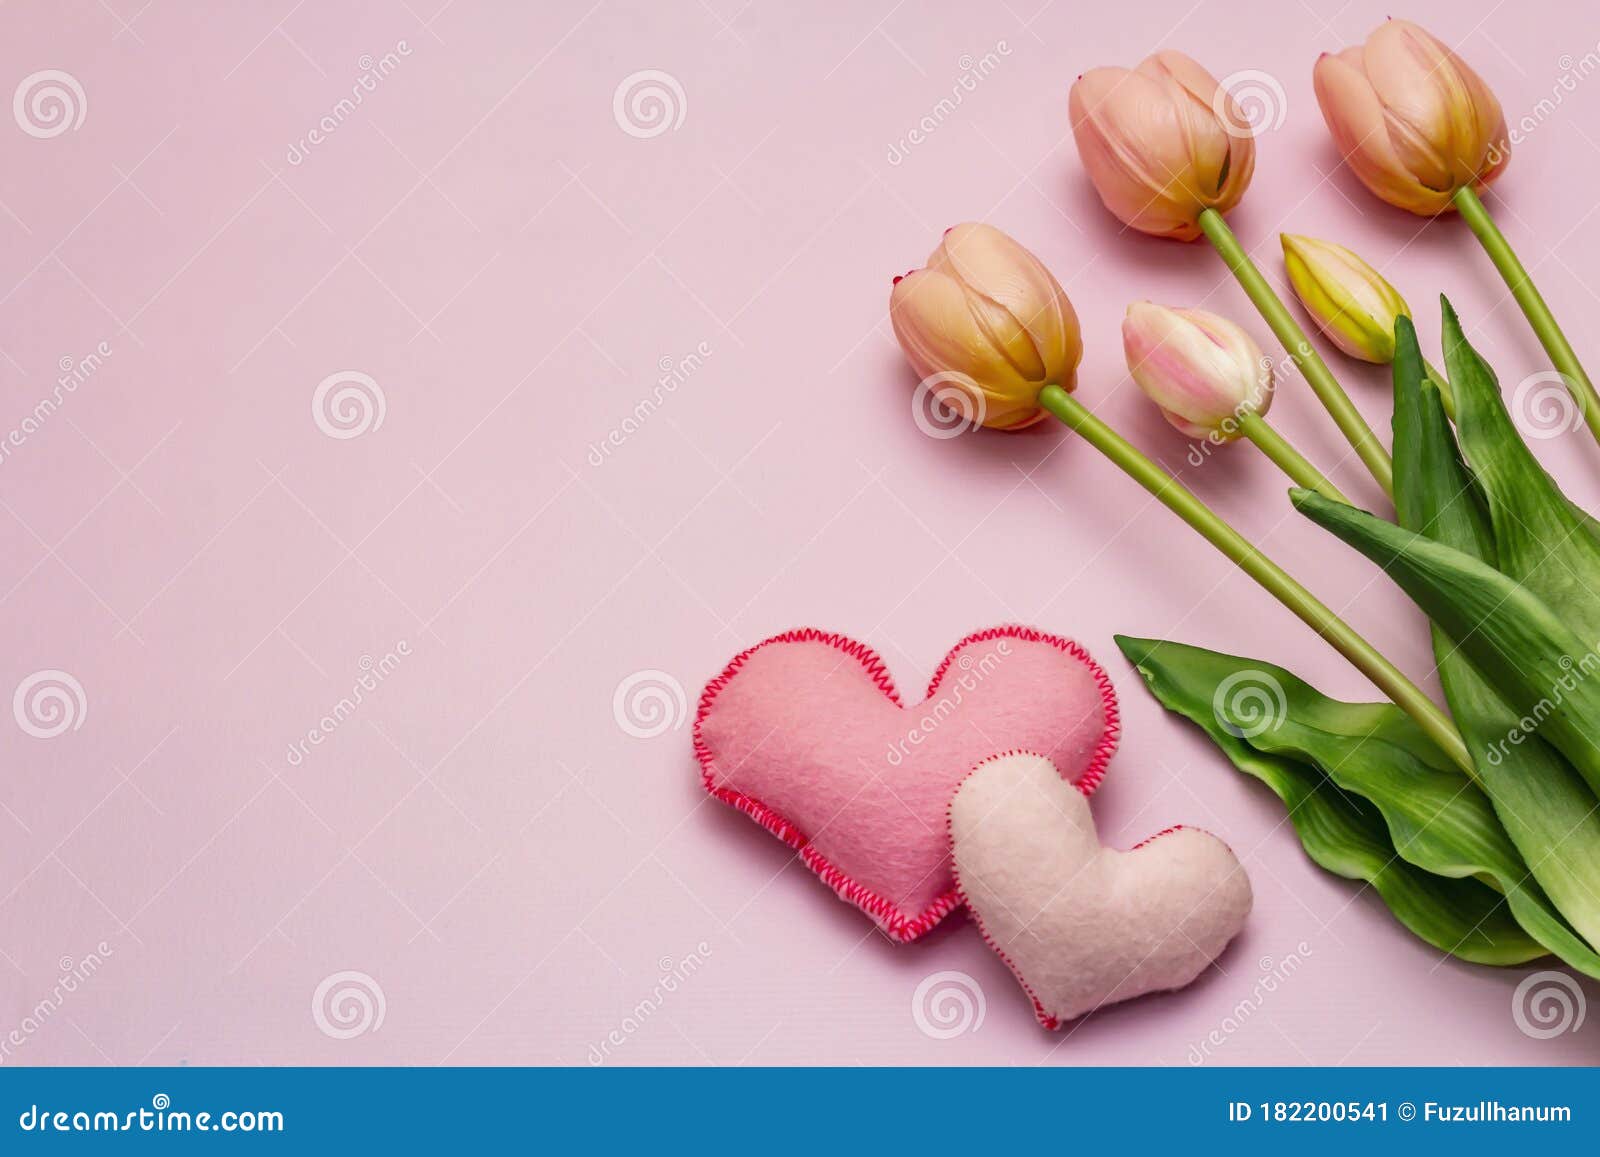 Free Vector  Mothers day wallpaper with flowers